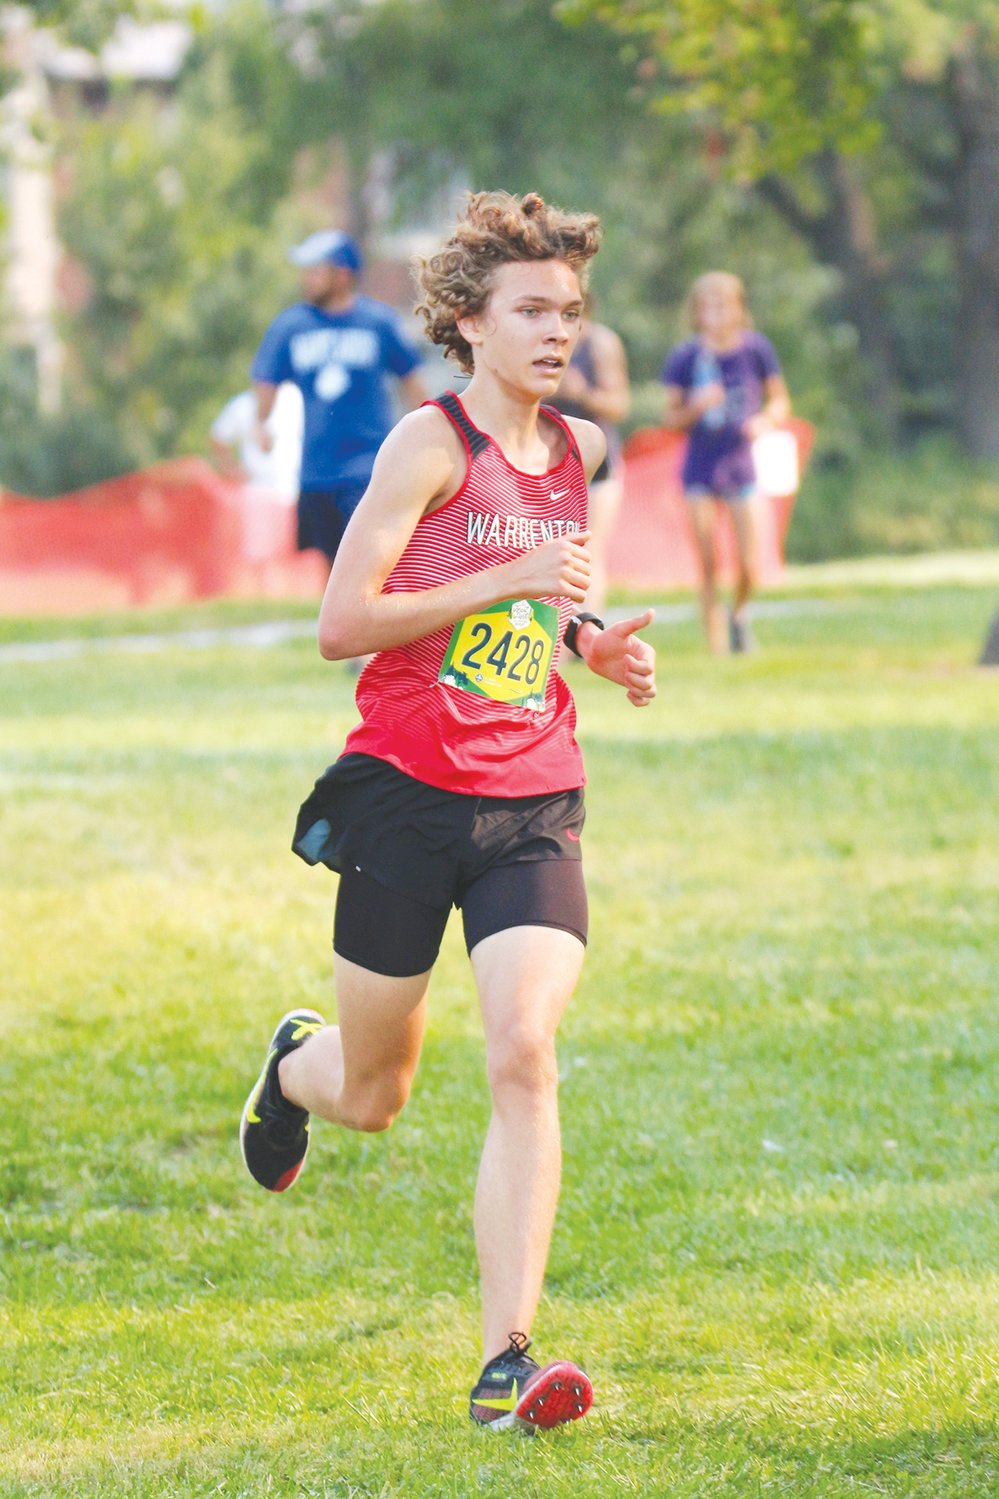 RACE WINNER — Warrenton’s Wyatt Claiborne won first place in the white division at the Forest Park Invitational Saturday. Claiborne completed the race in 17 minutes, 25.90 seconds.